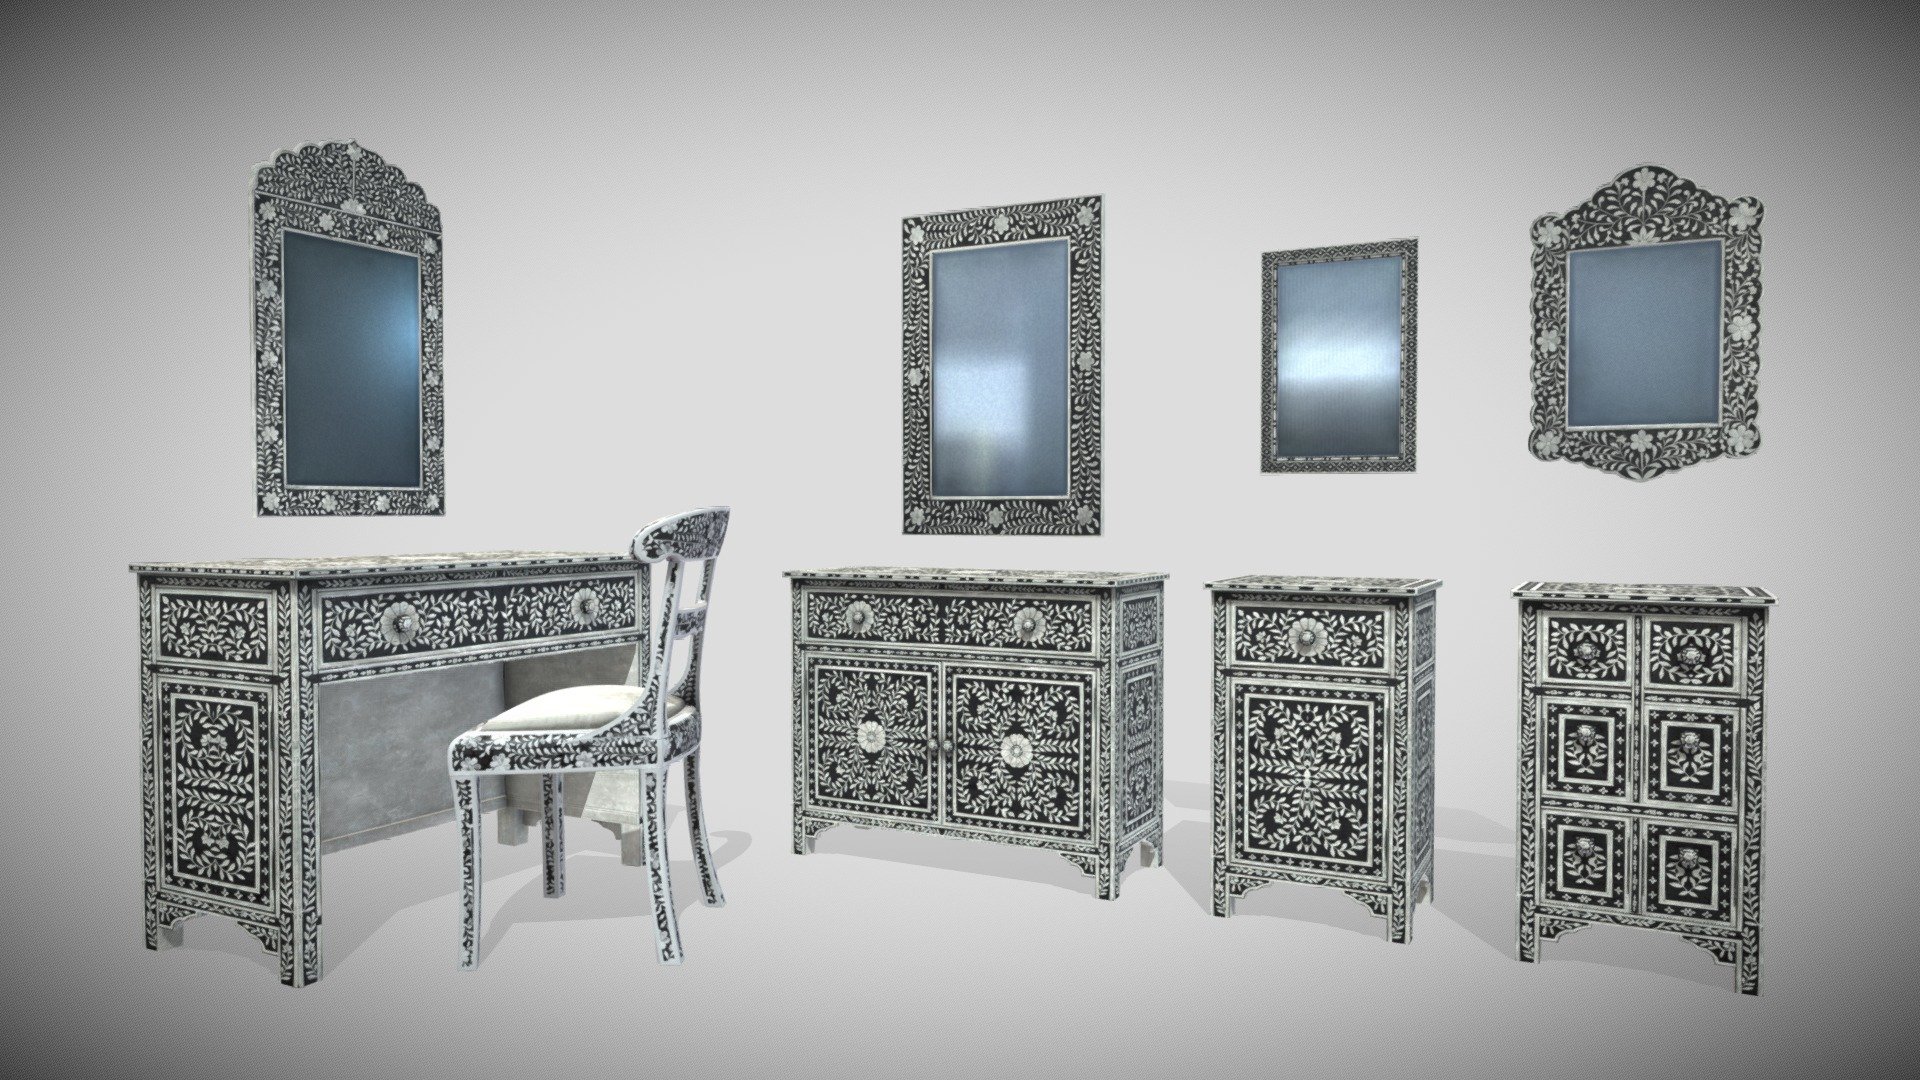 Every Object is One Material PBR Metalness 4k

Indipendent Objects with Gizmo 0

Quads - Styled Furniture - SerieAll - Buy Royalty Free 3D model by Francesco Coldesina (@topfrank2013) 3d model